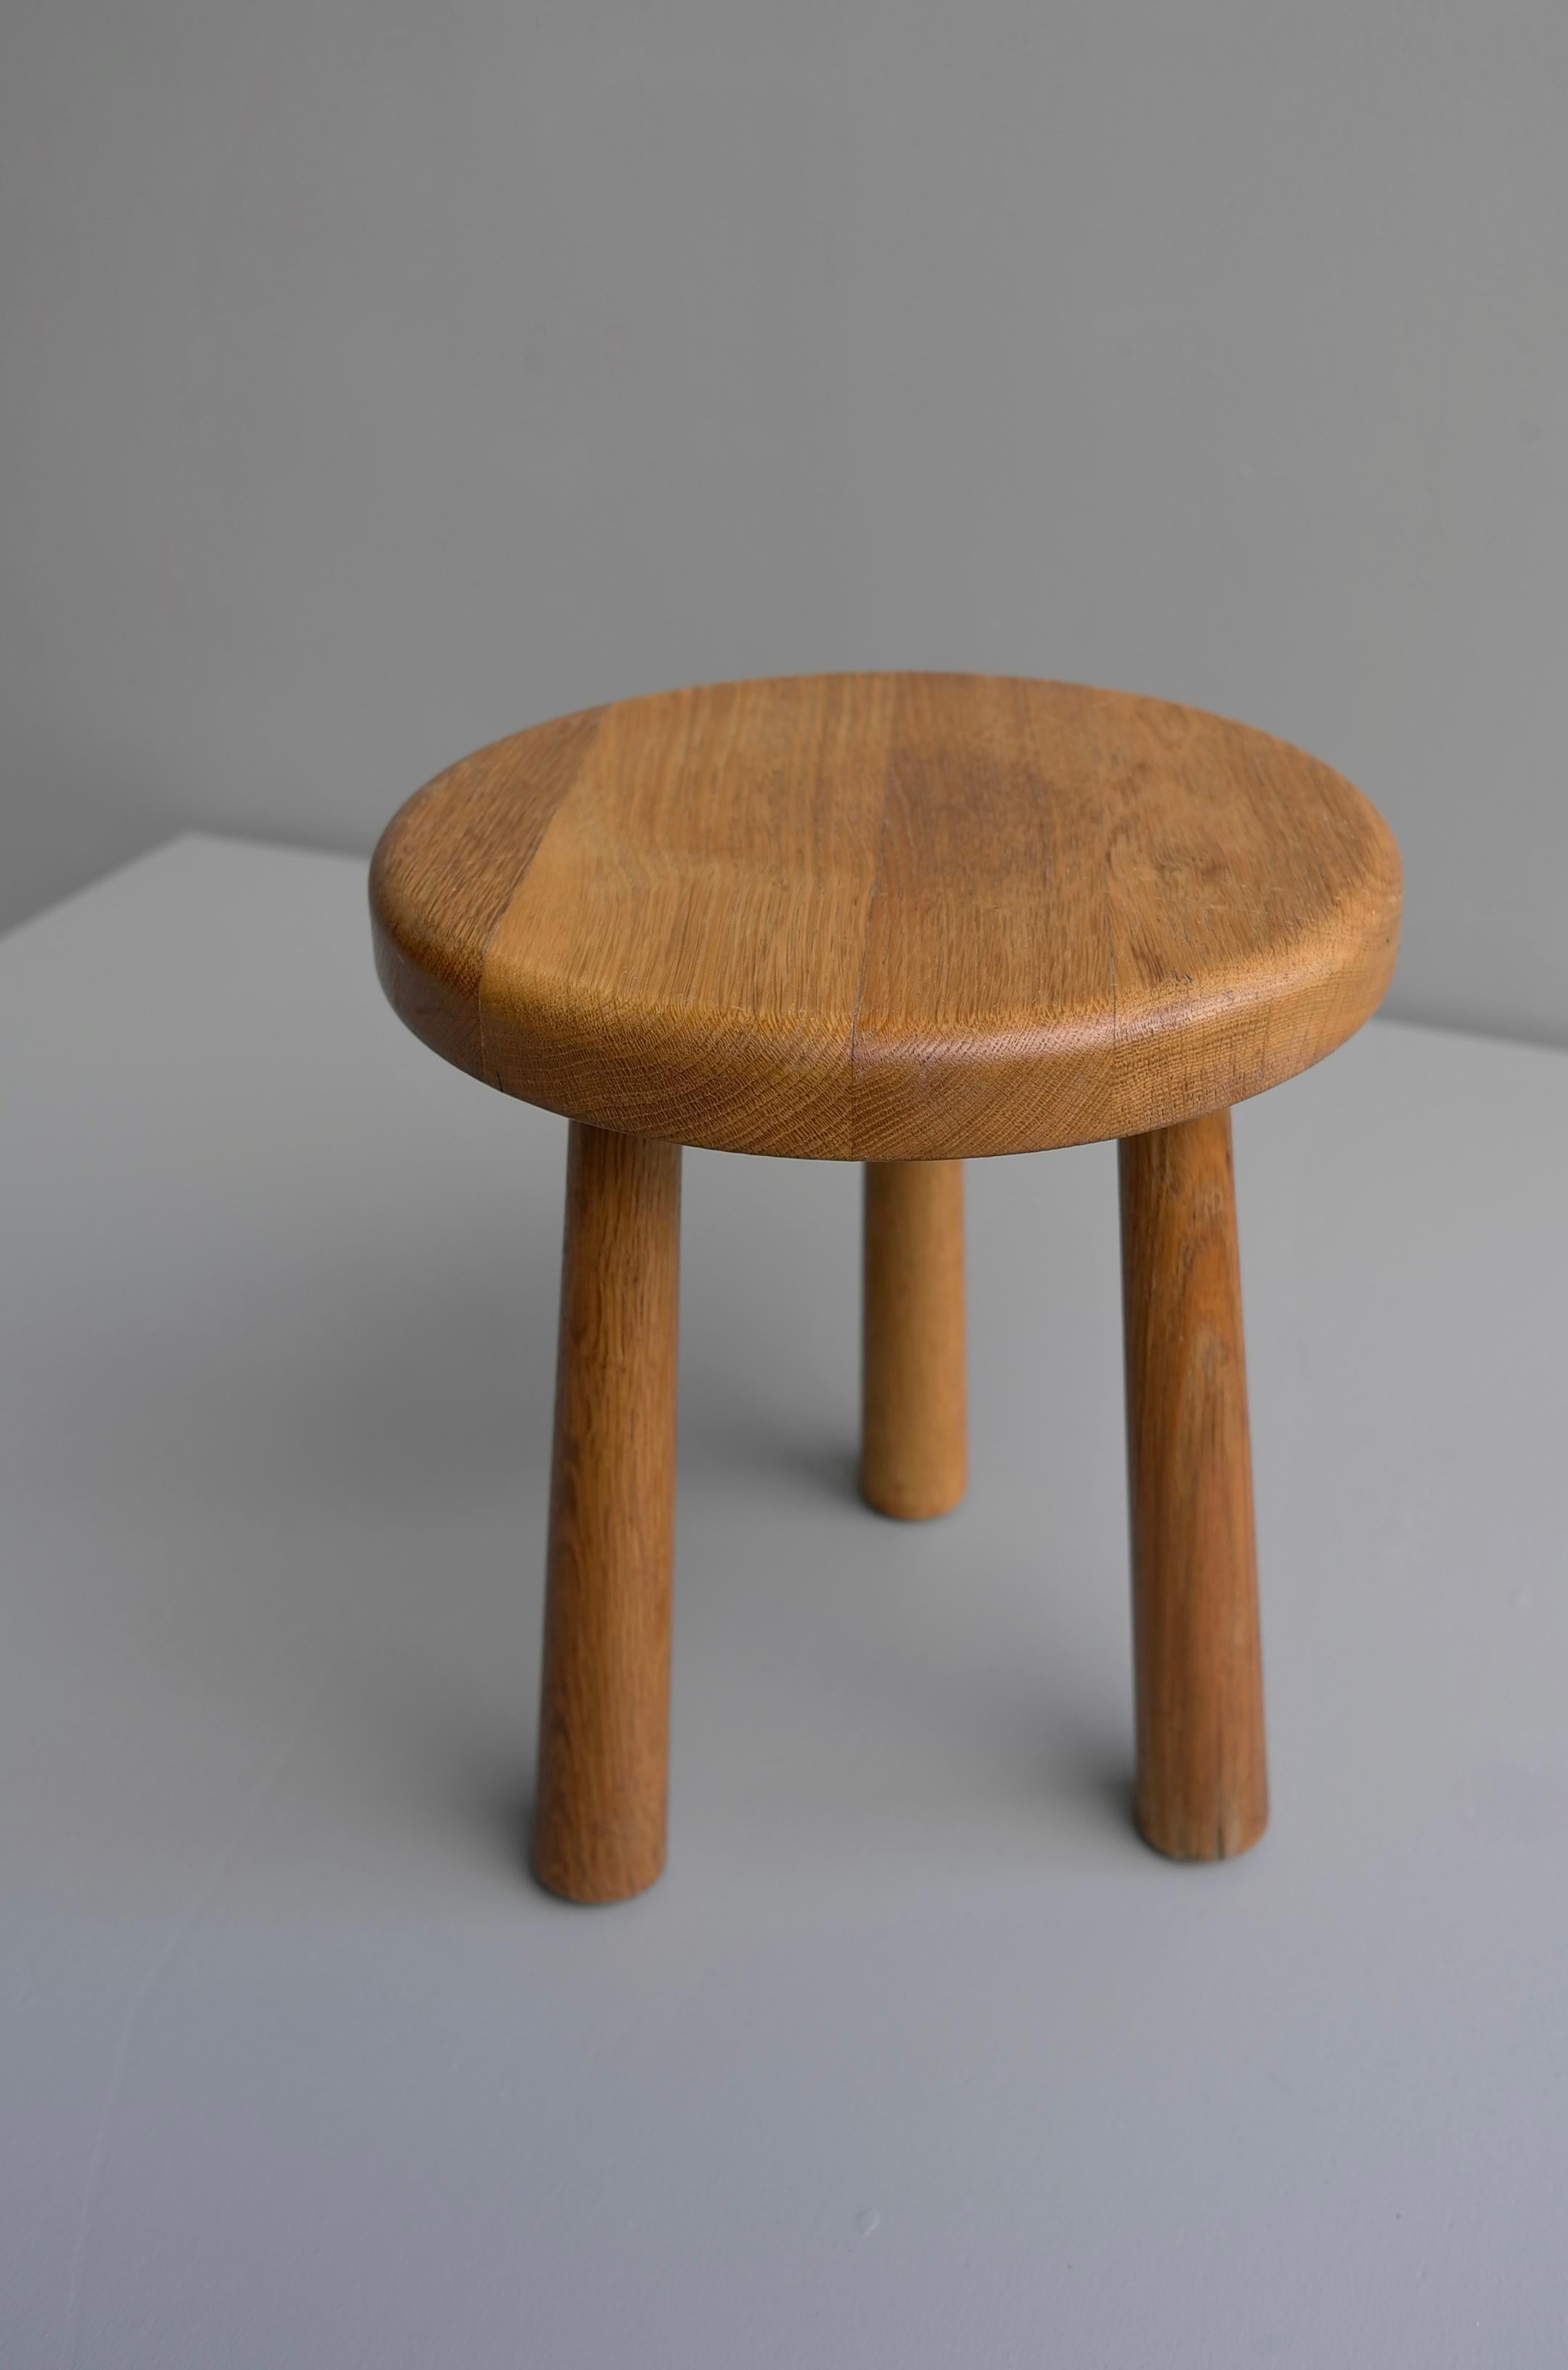 Mid-20th Century Midcentury Oak Stool in Style of Charlotte Perriand, France 1950s